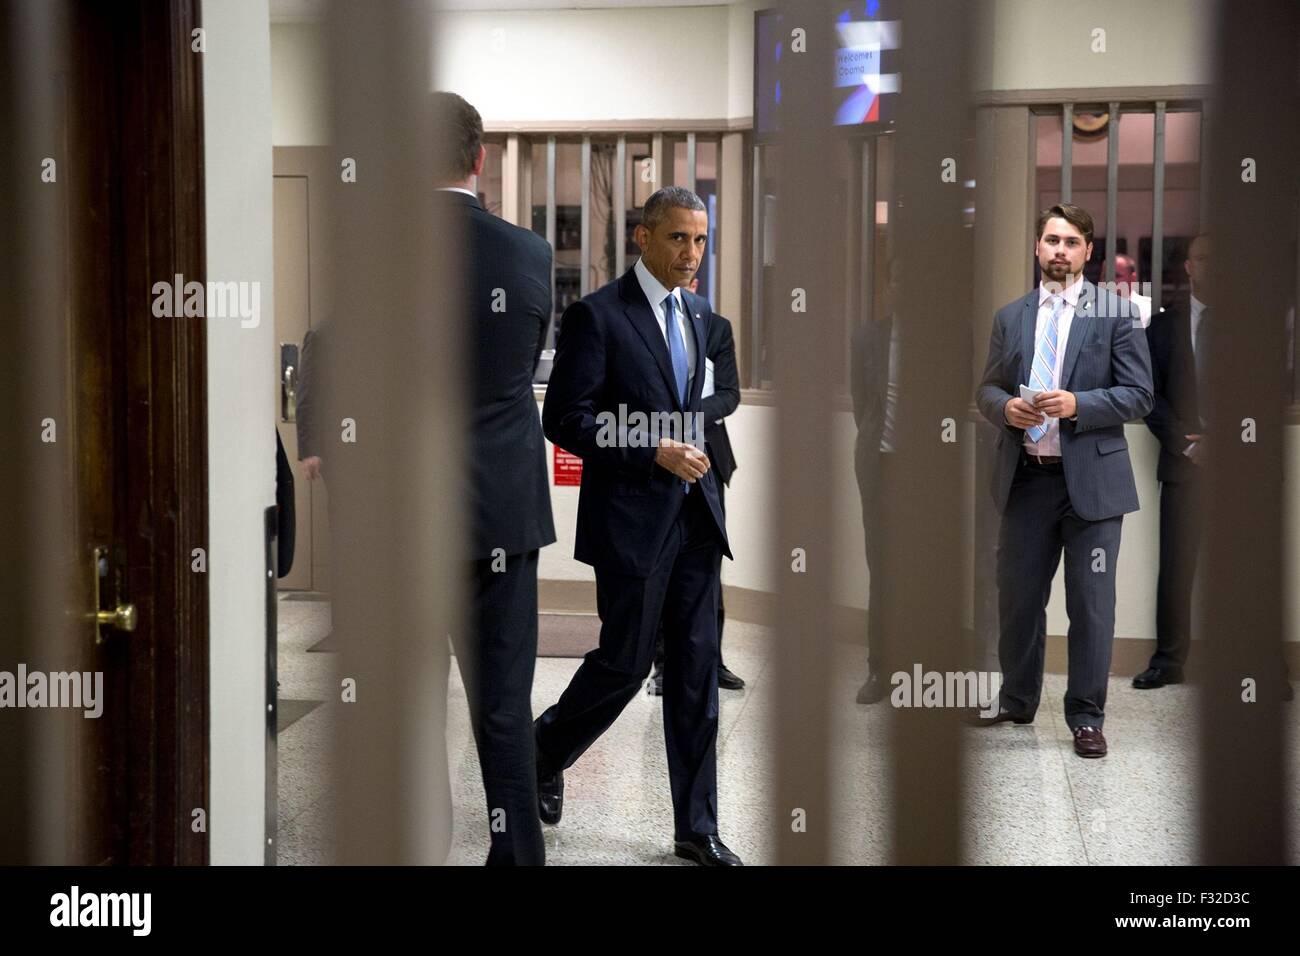 U.S. President Barack Obama tours the El Reno Federal Correctional Institution July 16, 2015 in El Reno, Oklahoma. Obama's trip was the first visit by a sitting President to a federal prison. Stock Photo